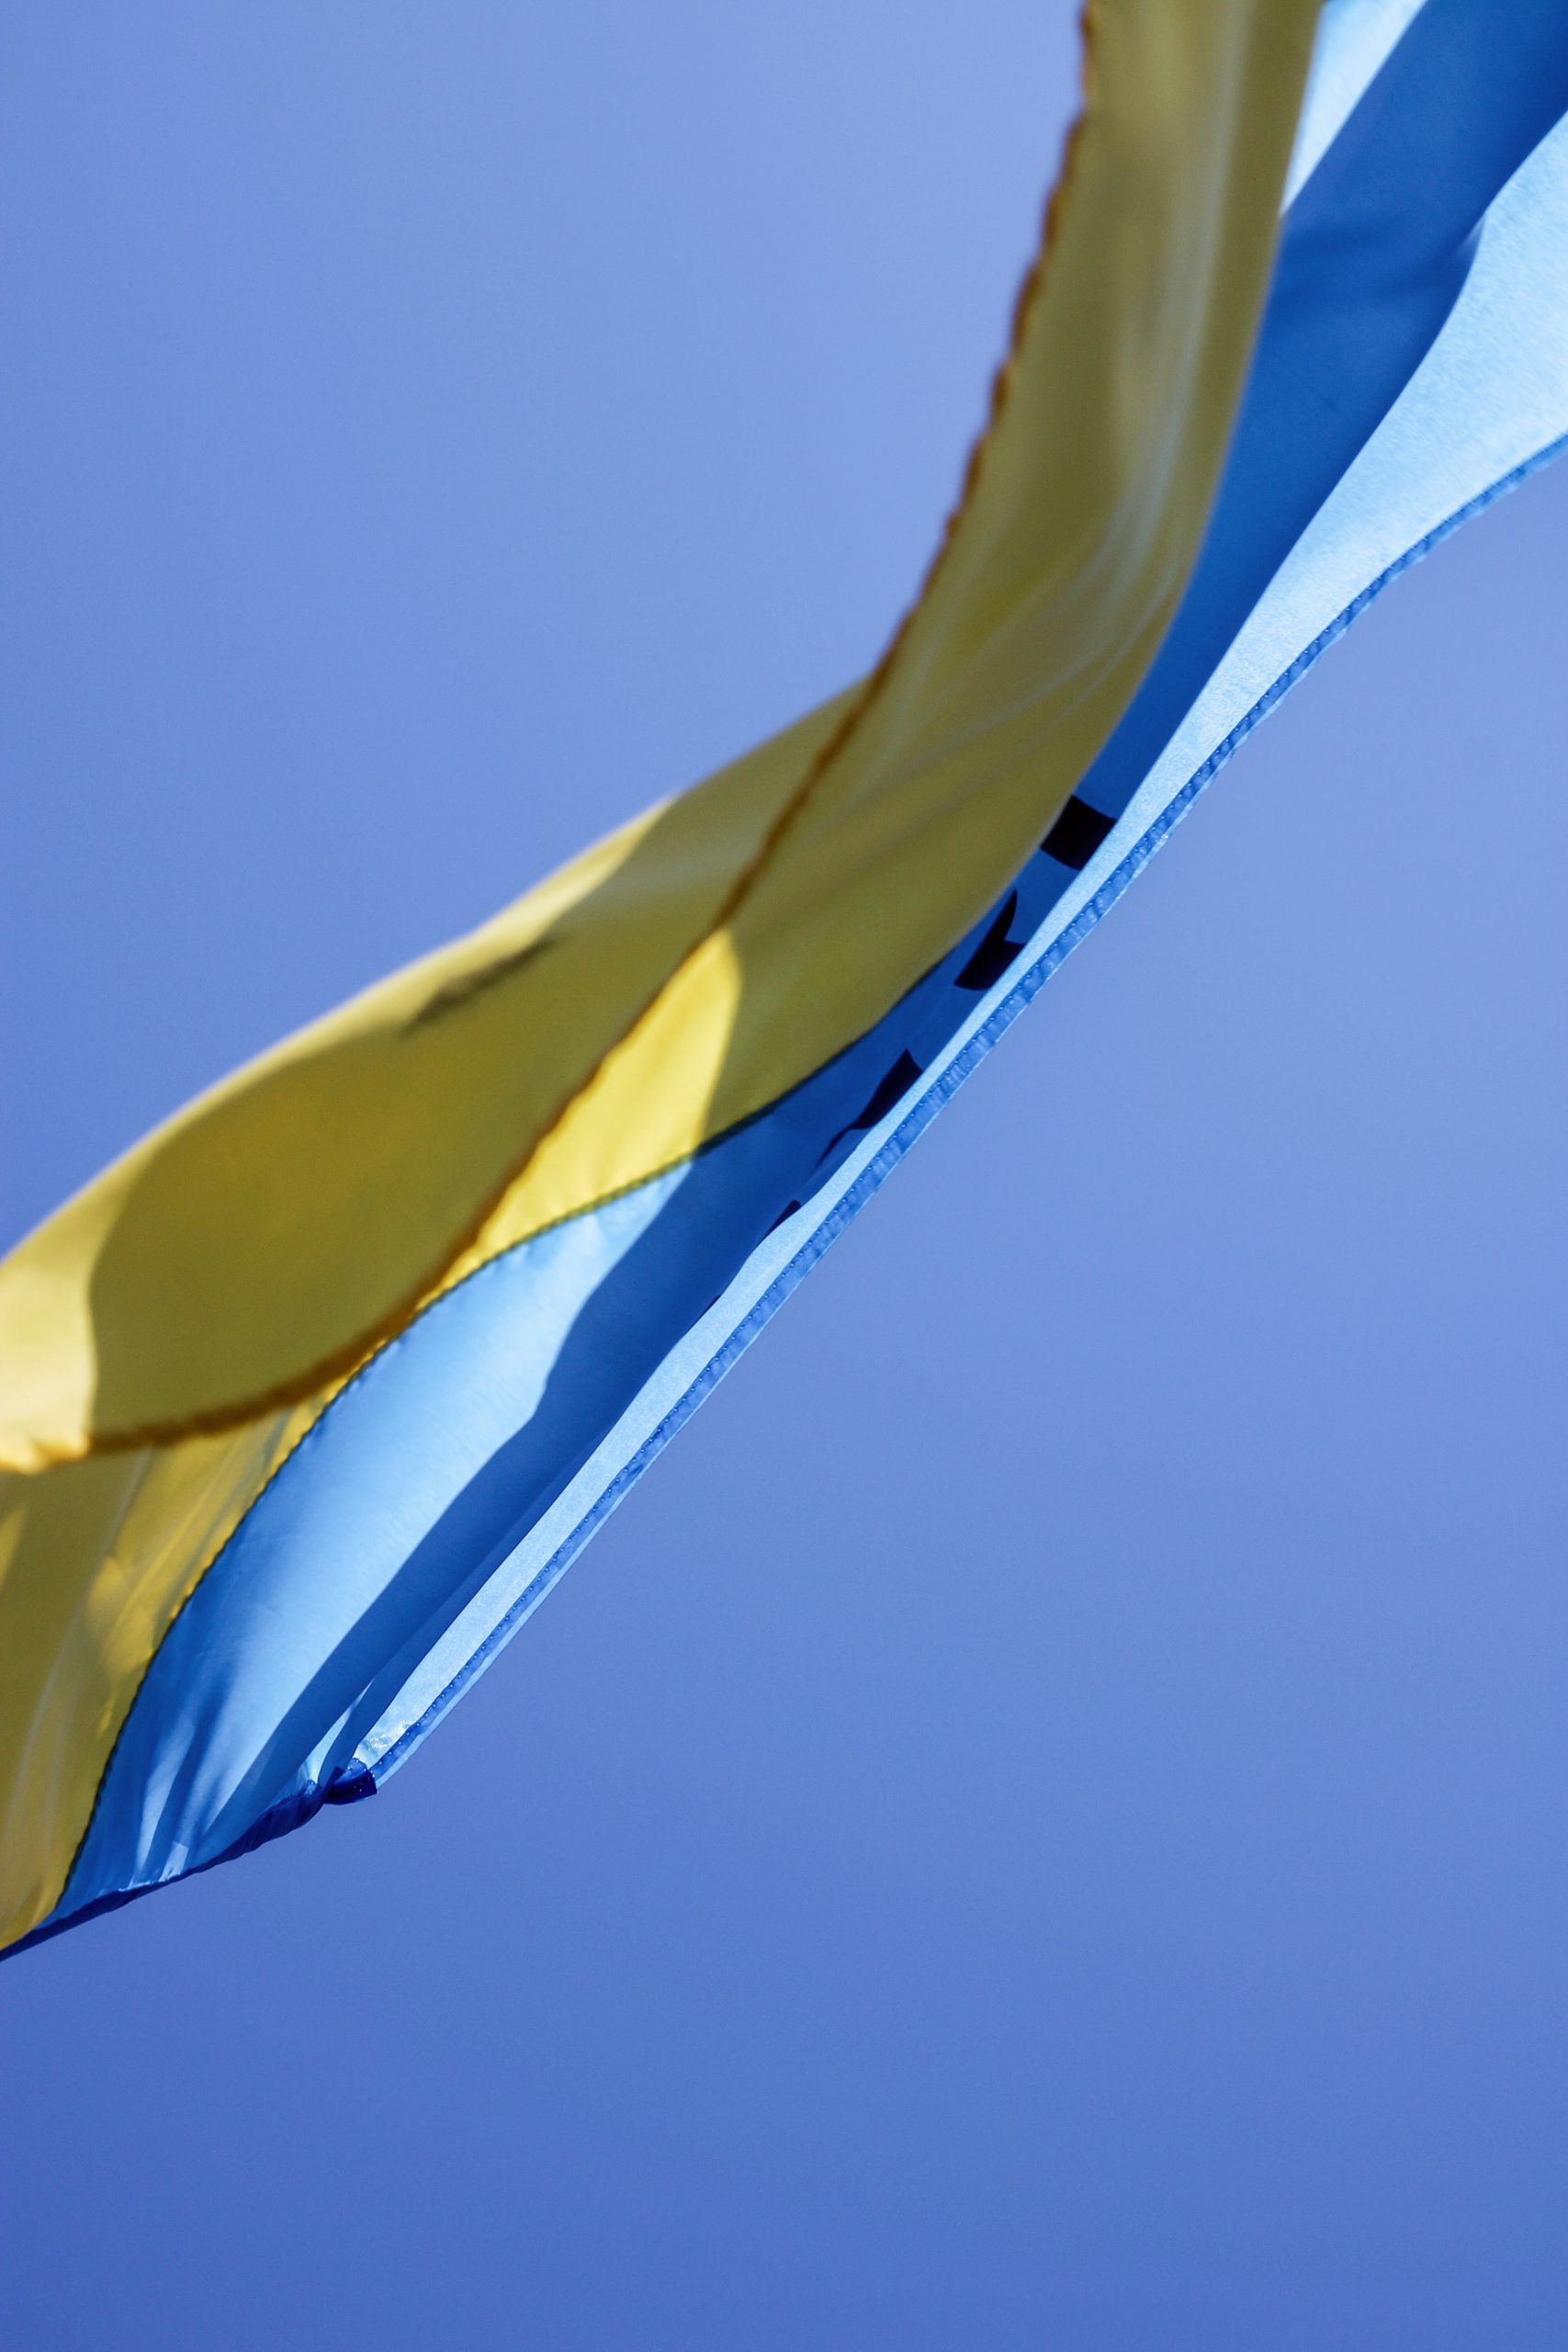 7 Ways You Can Support the People of Ukraine by Koya Webb